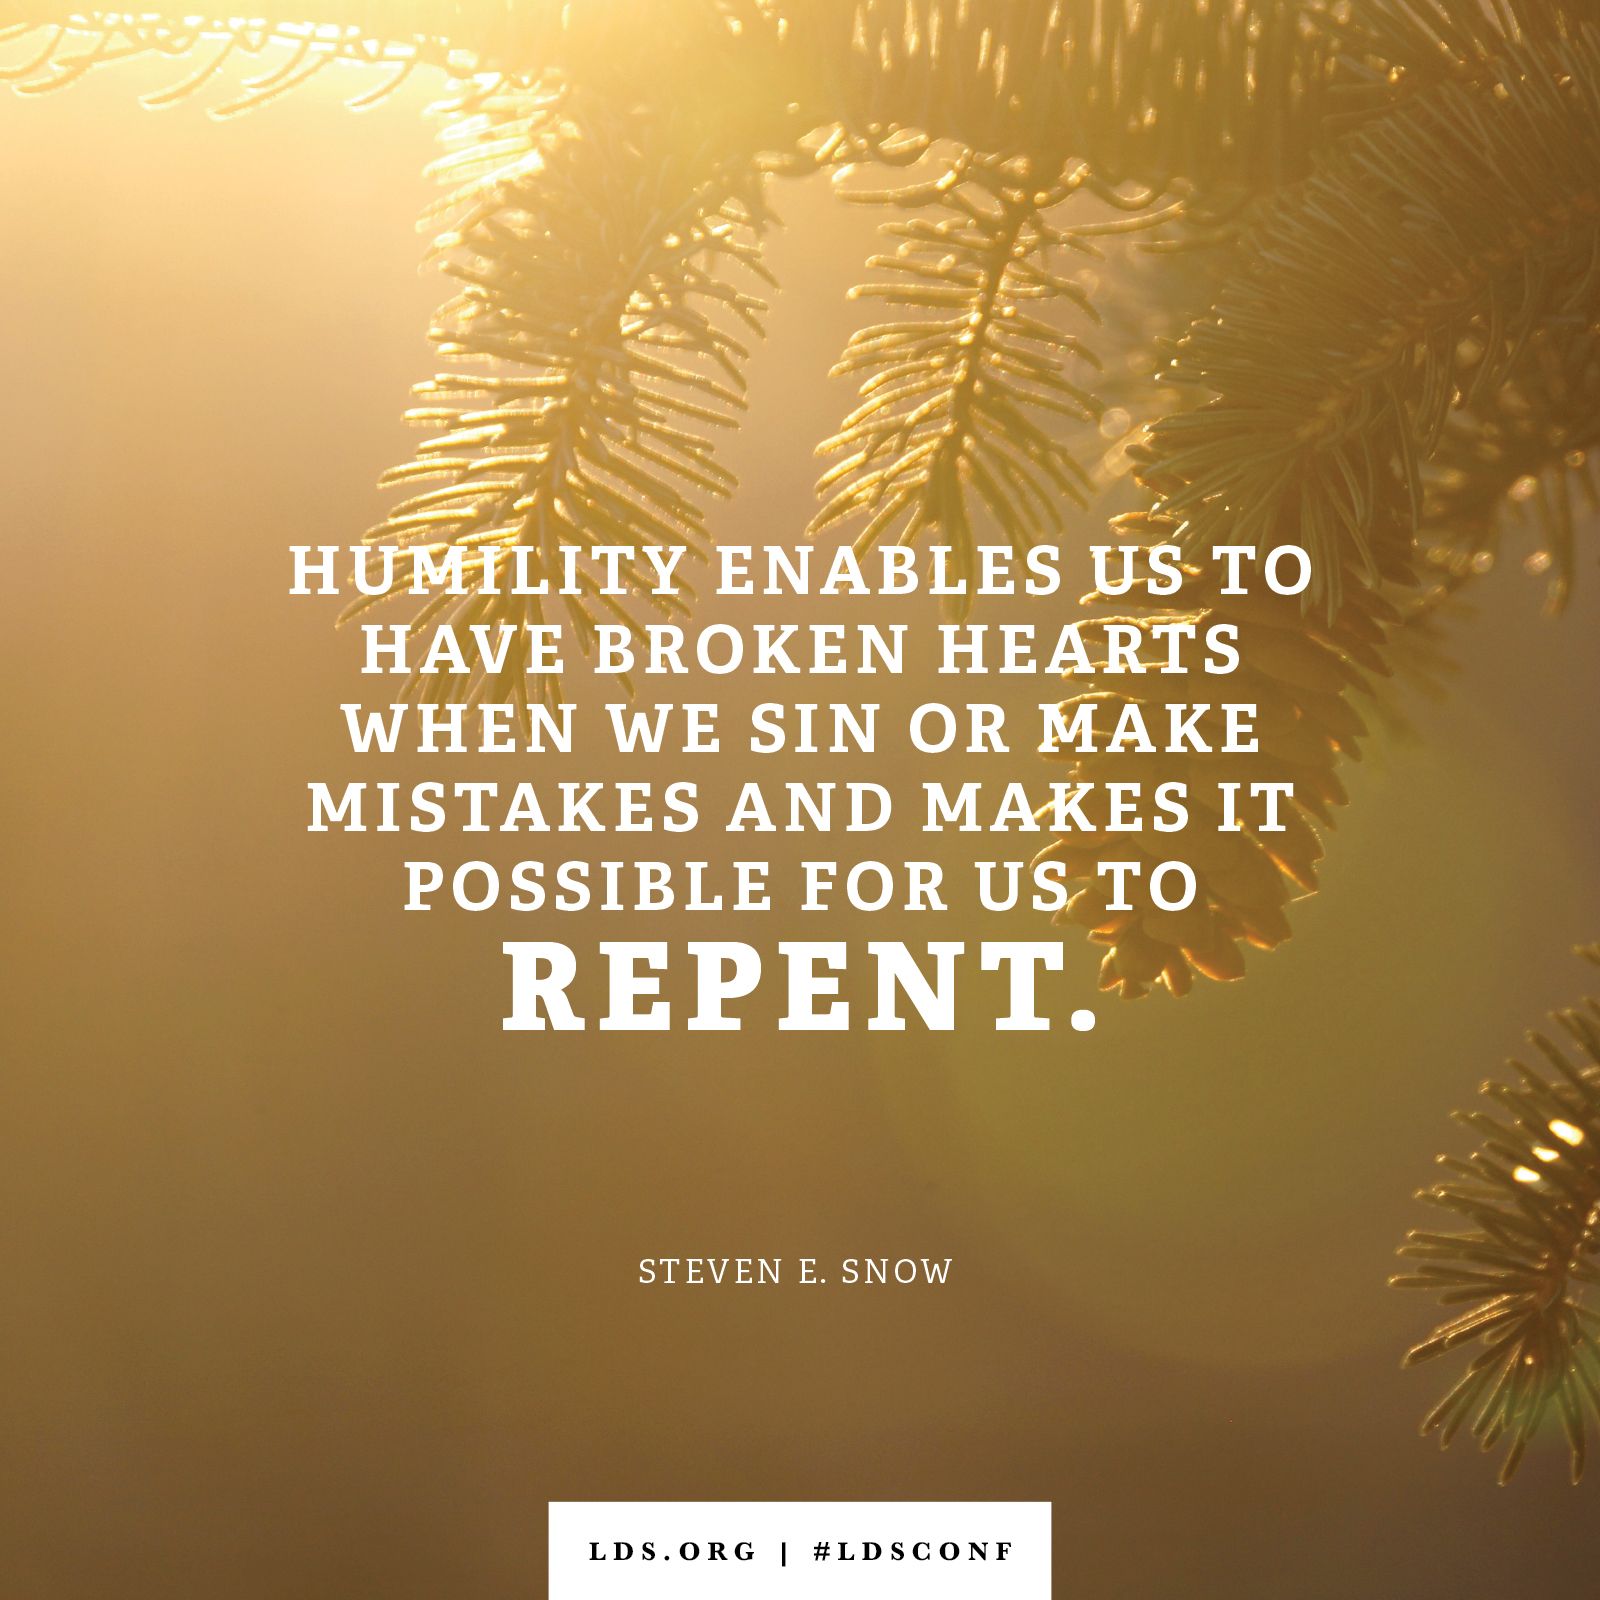 “Humility enables us to have broken hearts when we sin or make mistakes and makes it possible for us to repent.” —Elder Steven E. Snow, “Be Thou Humble”